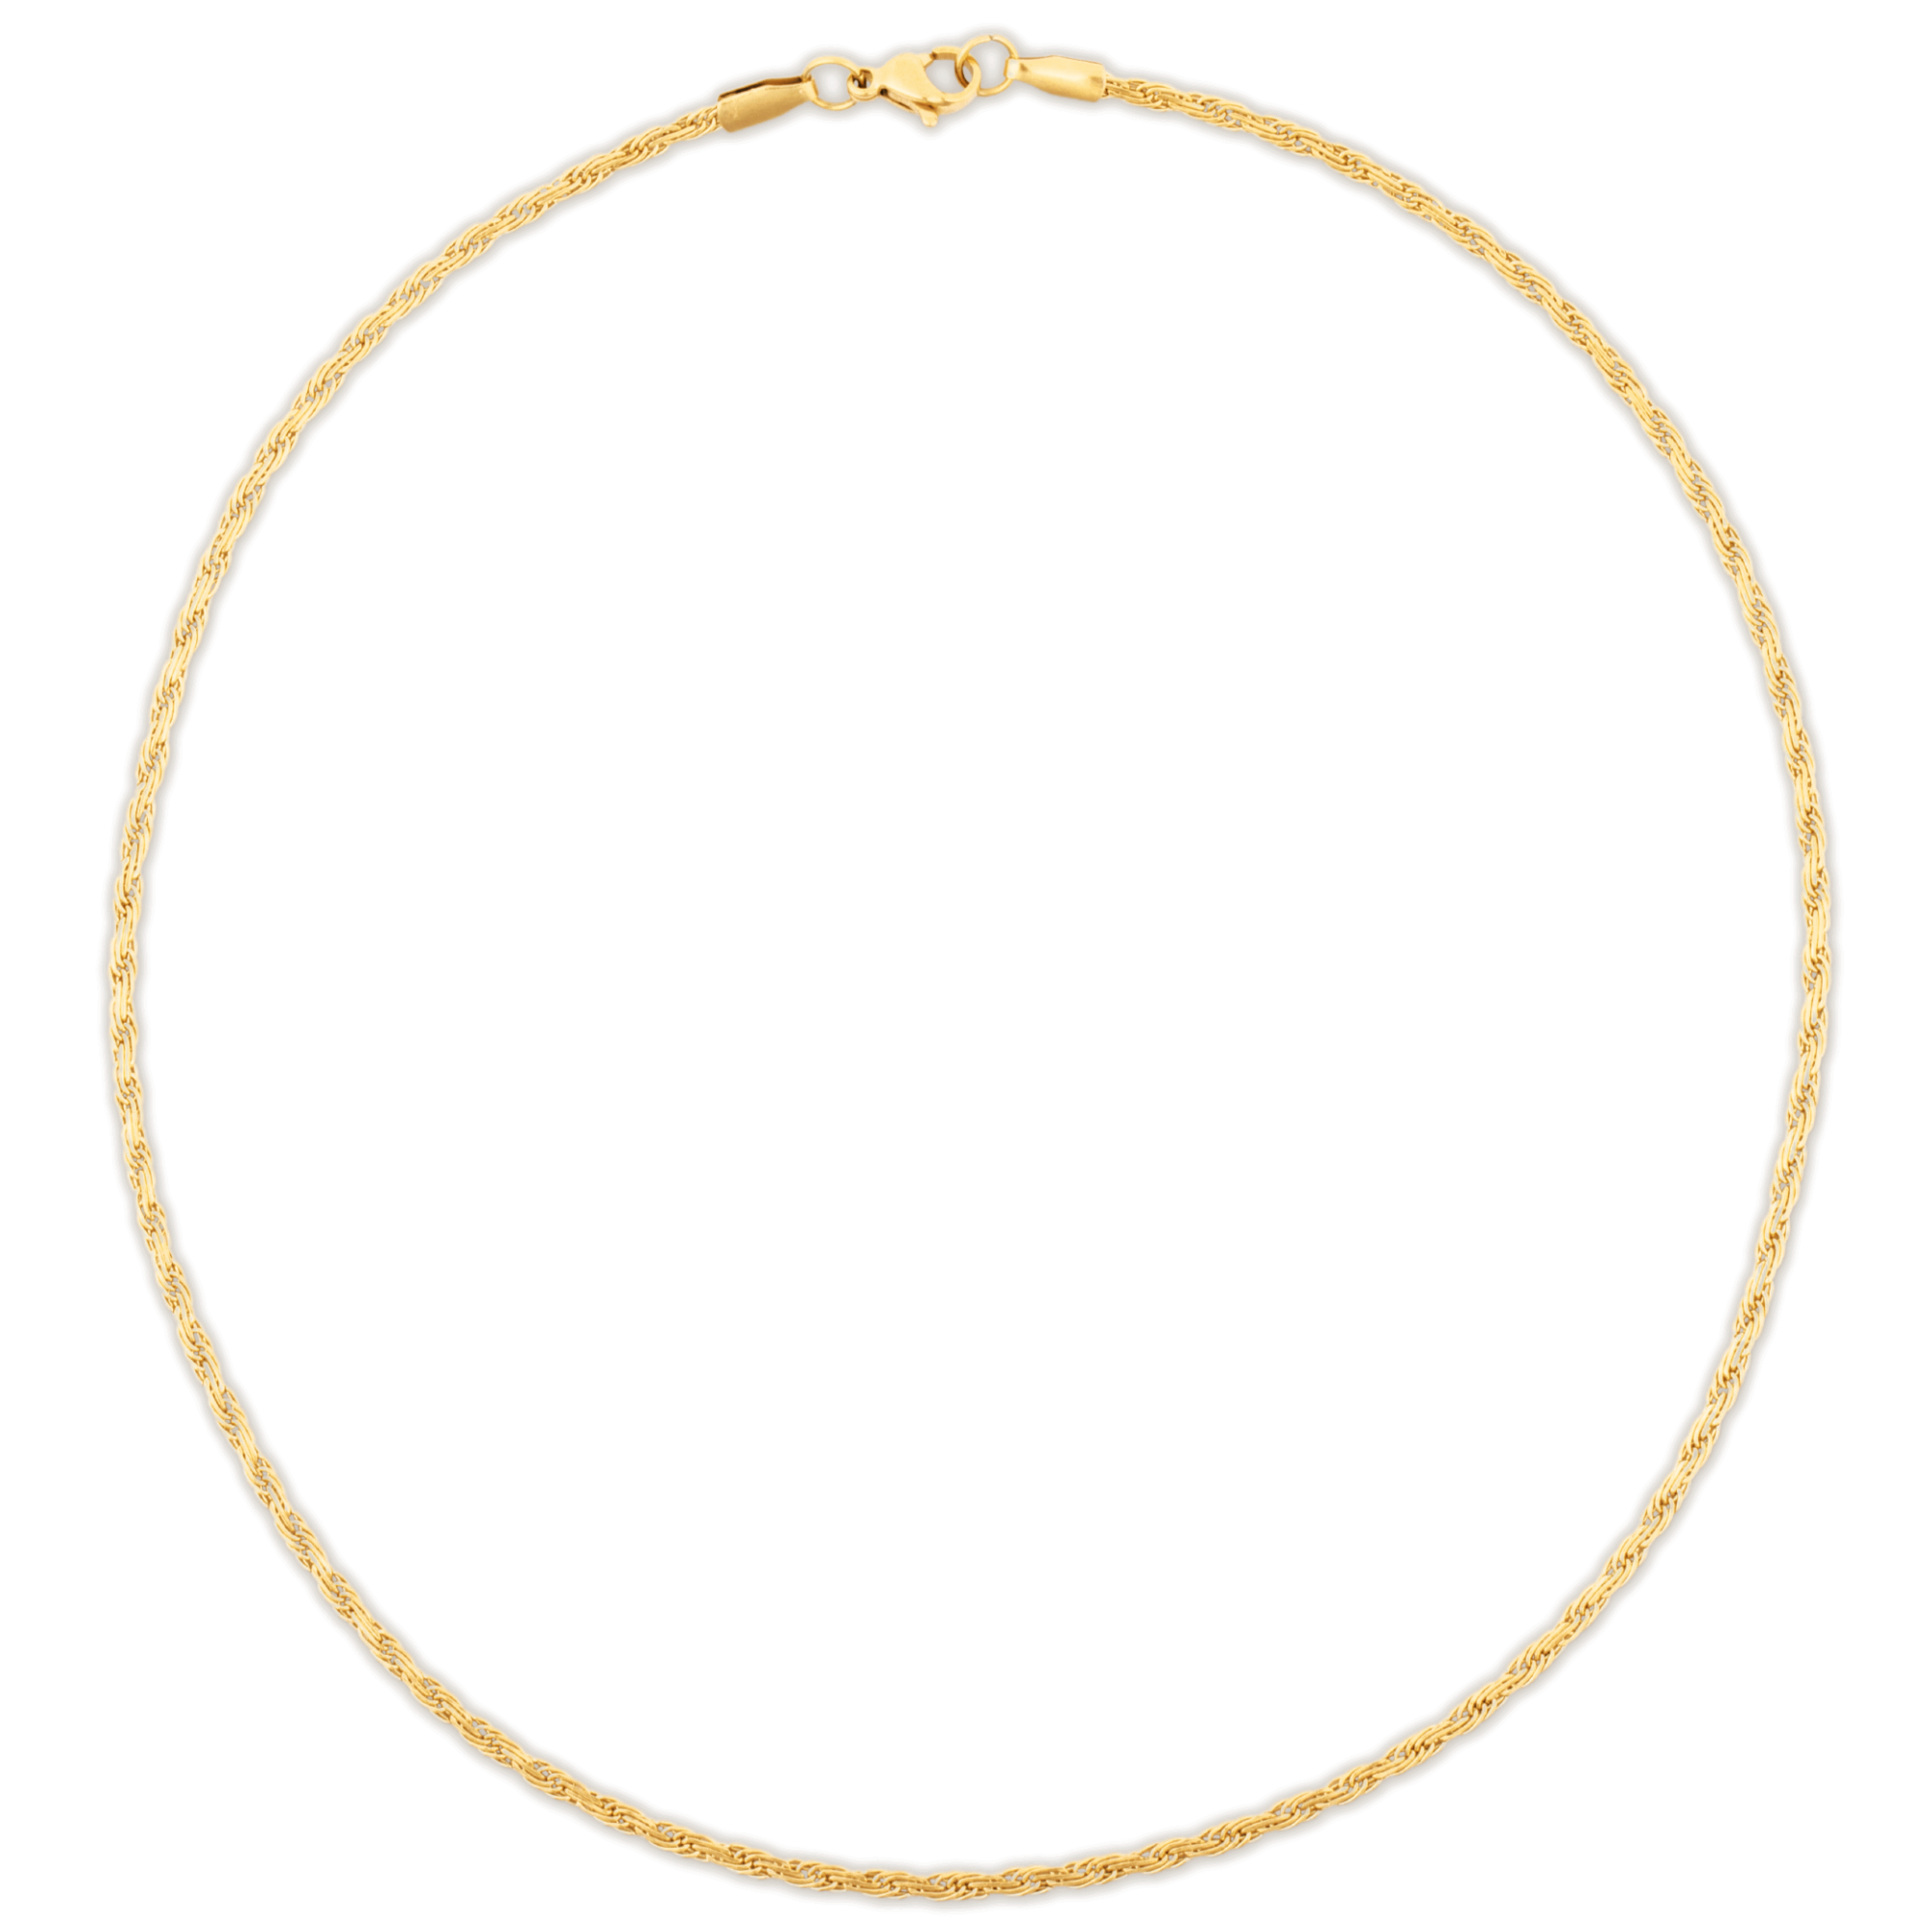 Ellie Vail Waterproof Jewelry - Calla Flat Rope Chain Necklace Gold